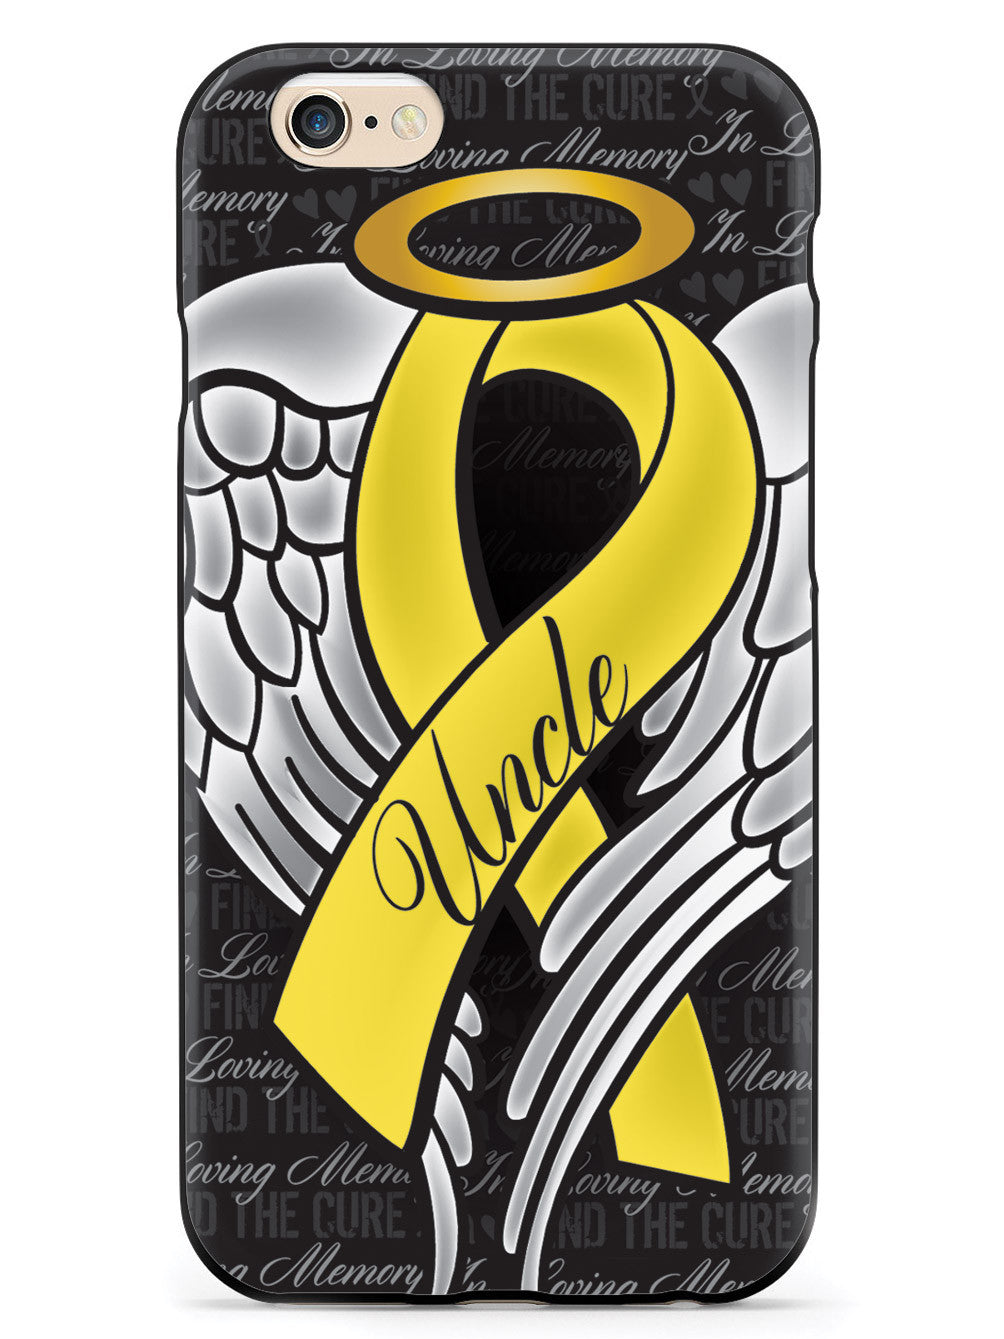 In Loving Memory of My Uncle - Yellow Ribbon Case